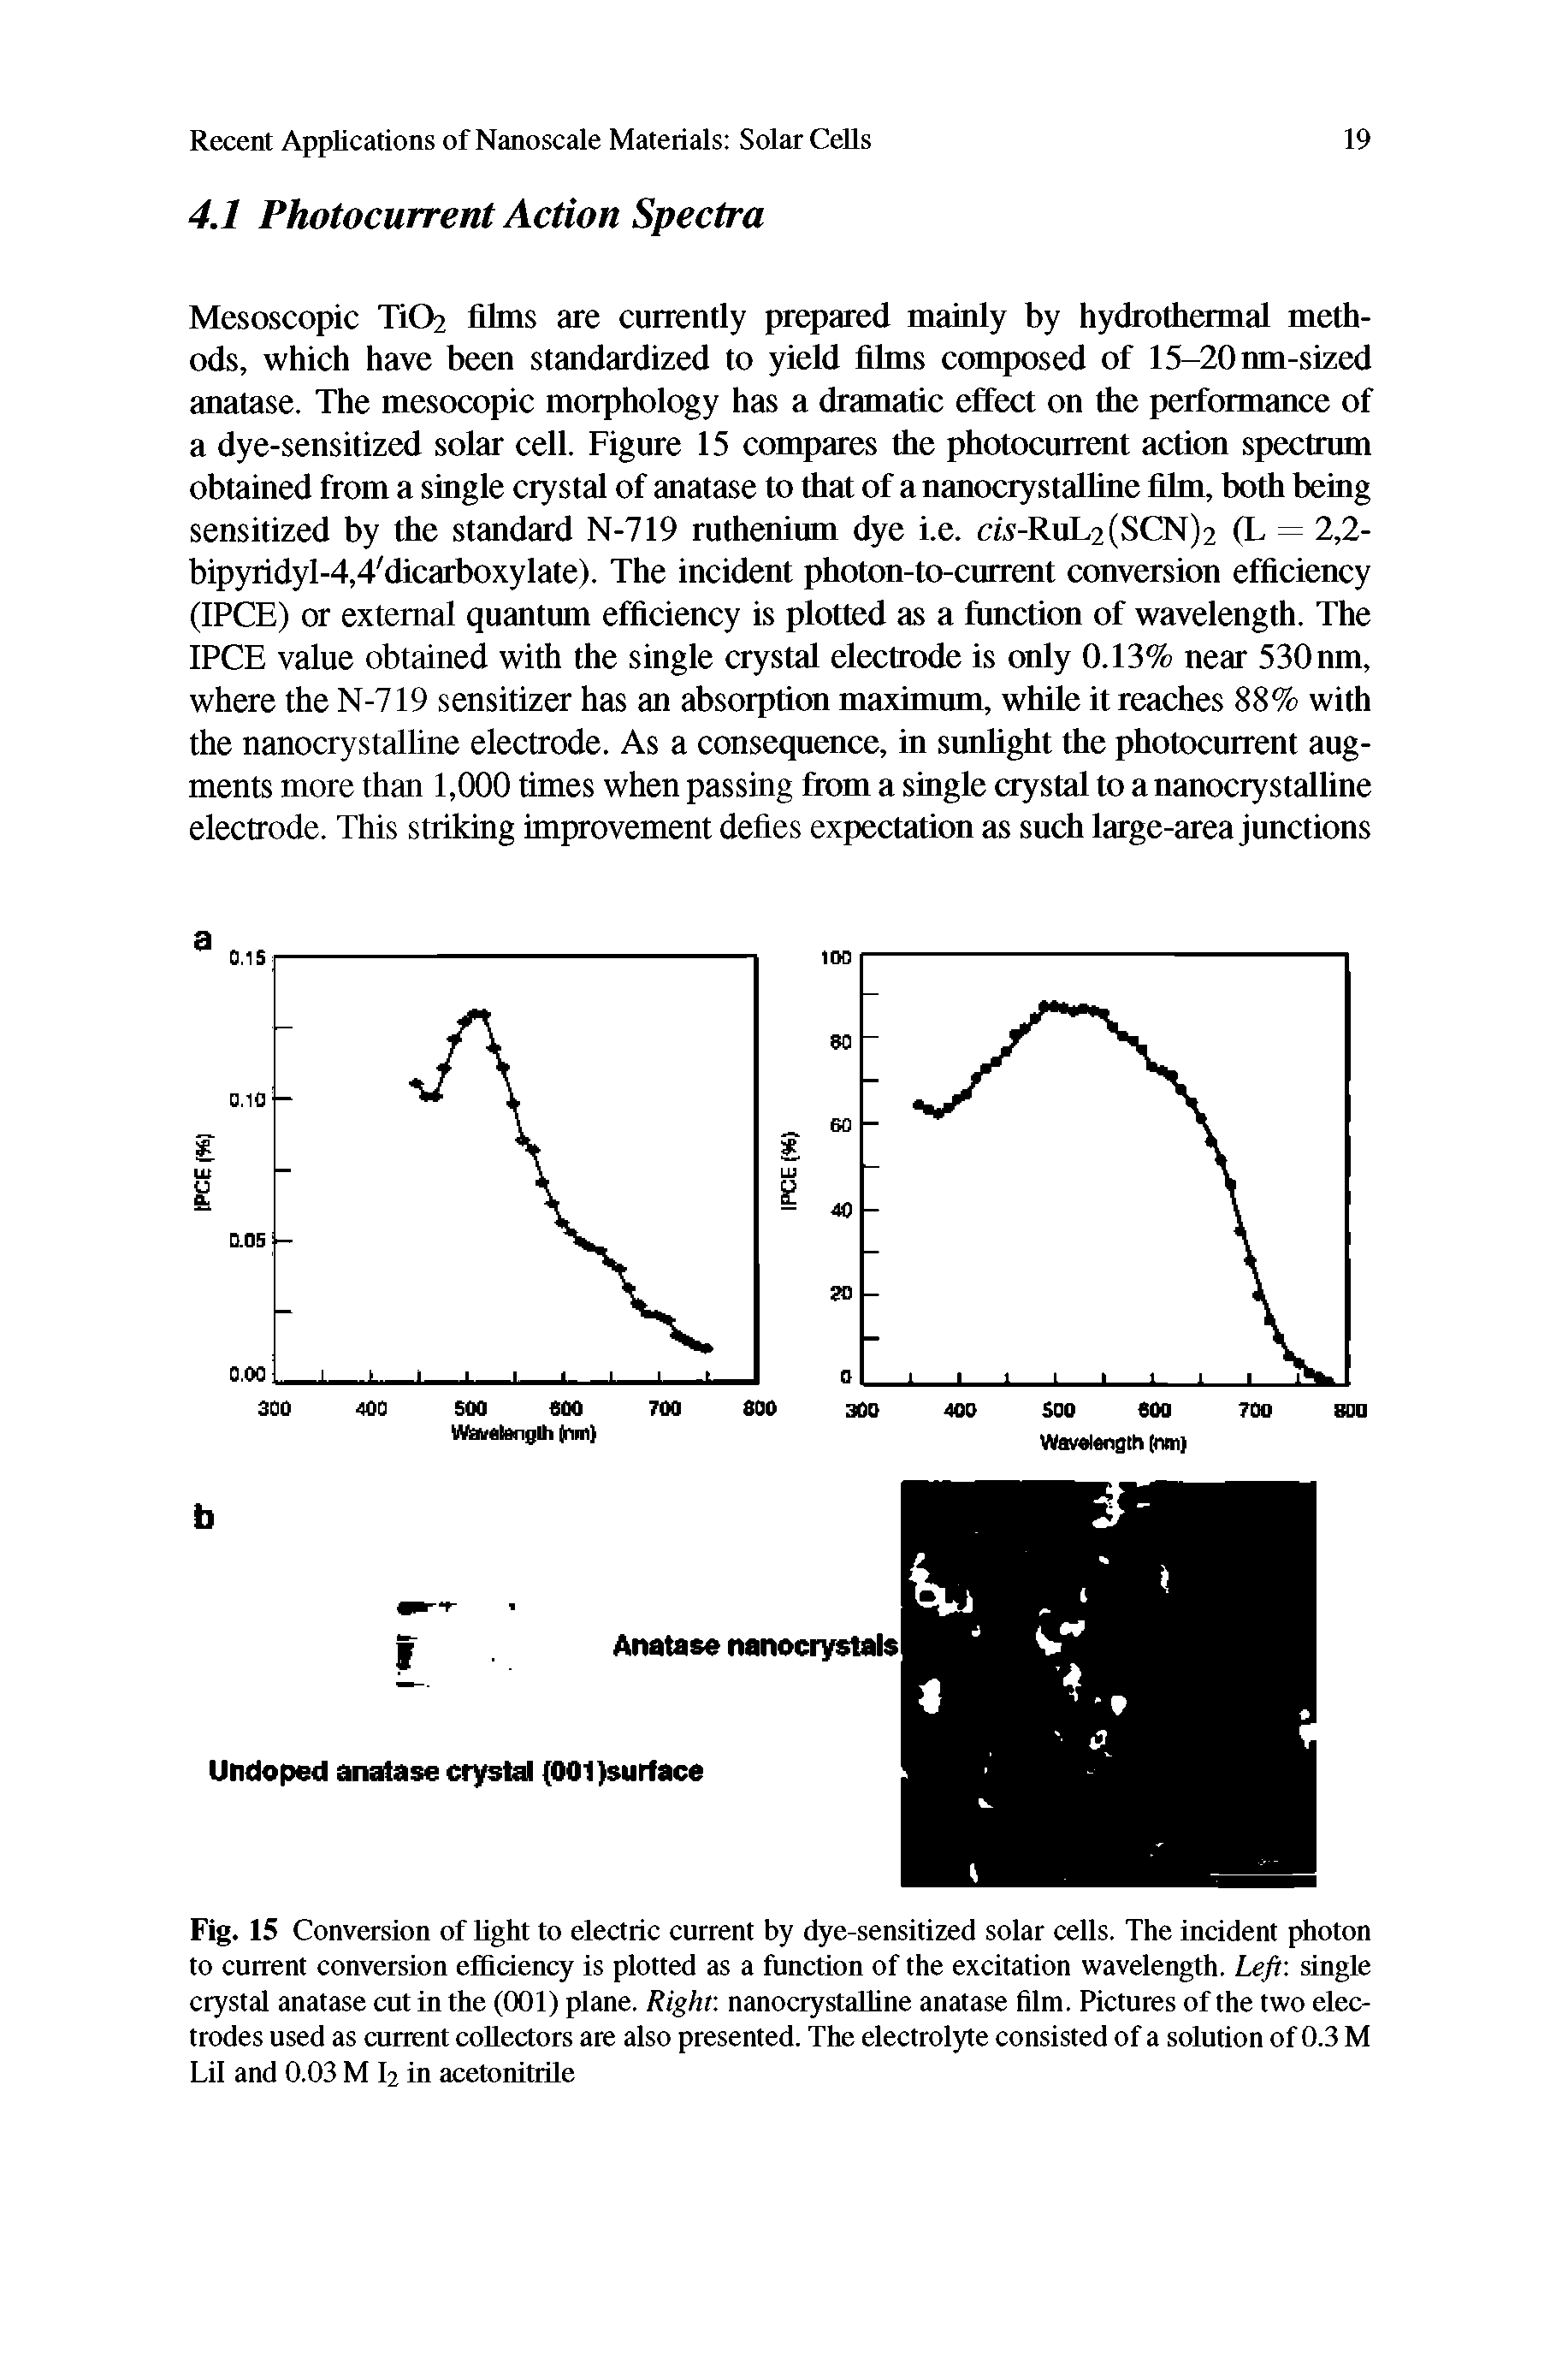 Fig. 15 Conversion of light to electric current by dye-sensitized solar cells. The incident photon to current conversion efficiency is plotted as a function of the excitation wavelength. Left single crystal anatase cut in the (001) plane. Right nanocrystaUine anatase film. Pictures of the two electrodes used as current collectors are also presented. The electrolyte consisted of a solution of 0.3 M Lil and 0.03 M fr in acetonitrile...